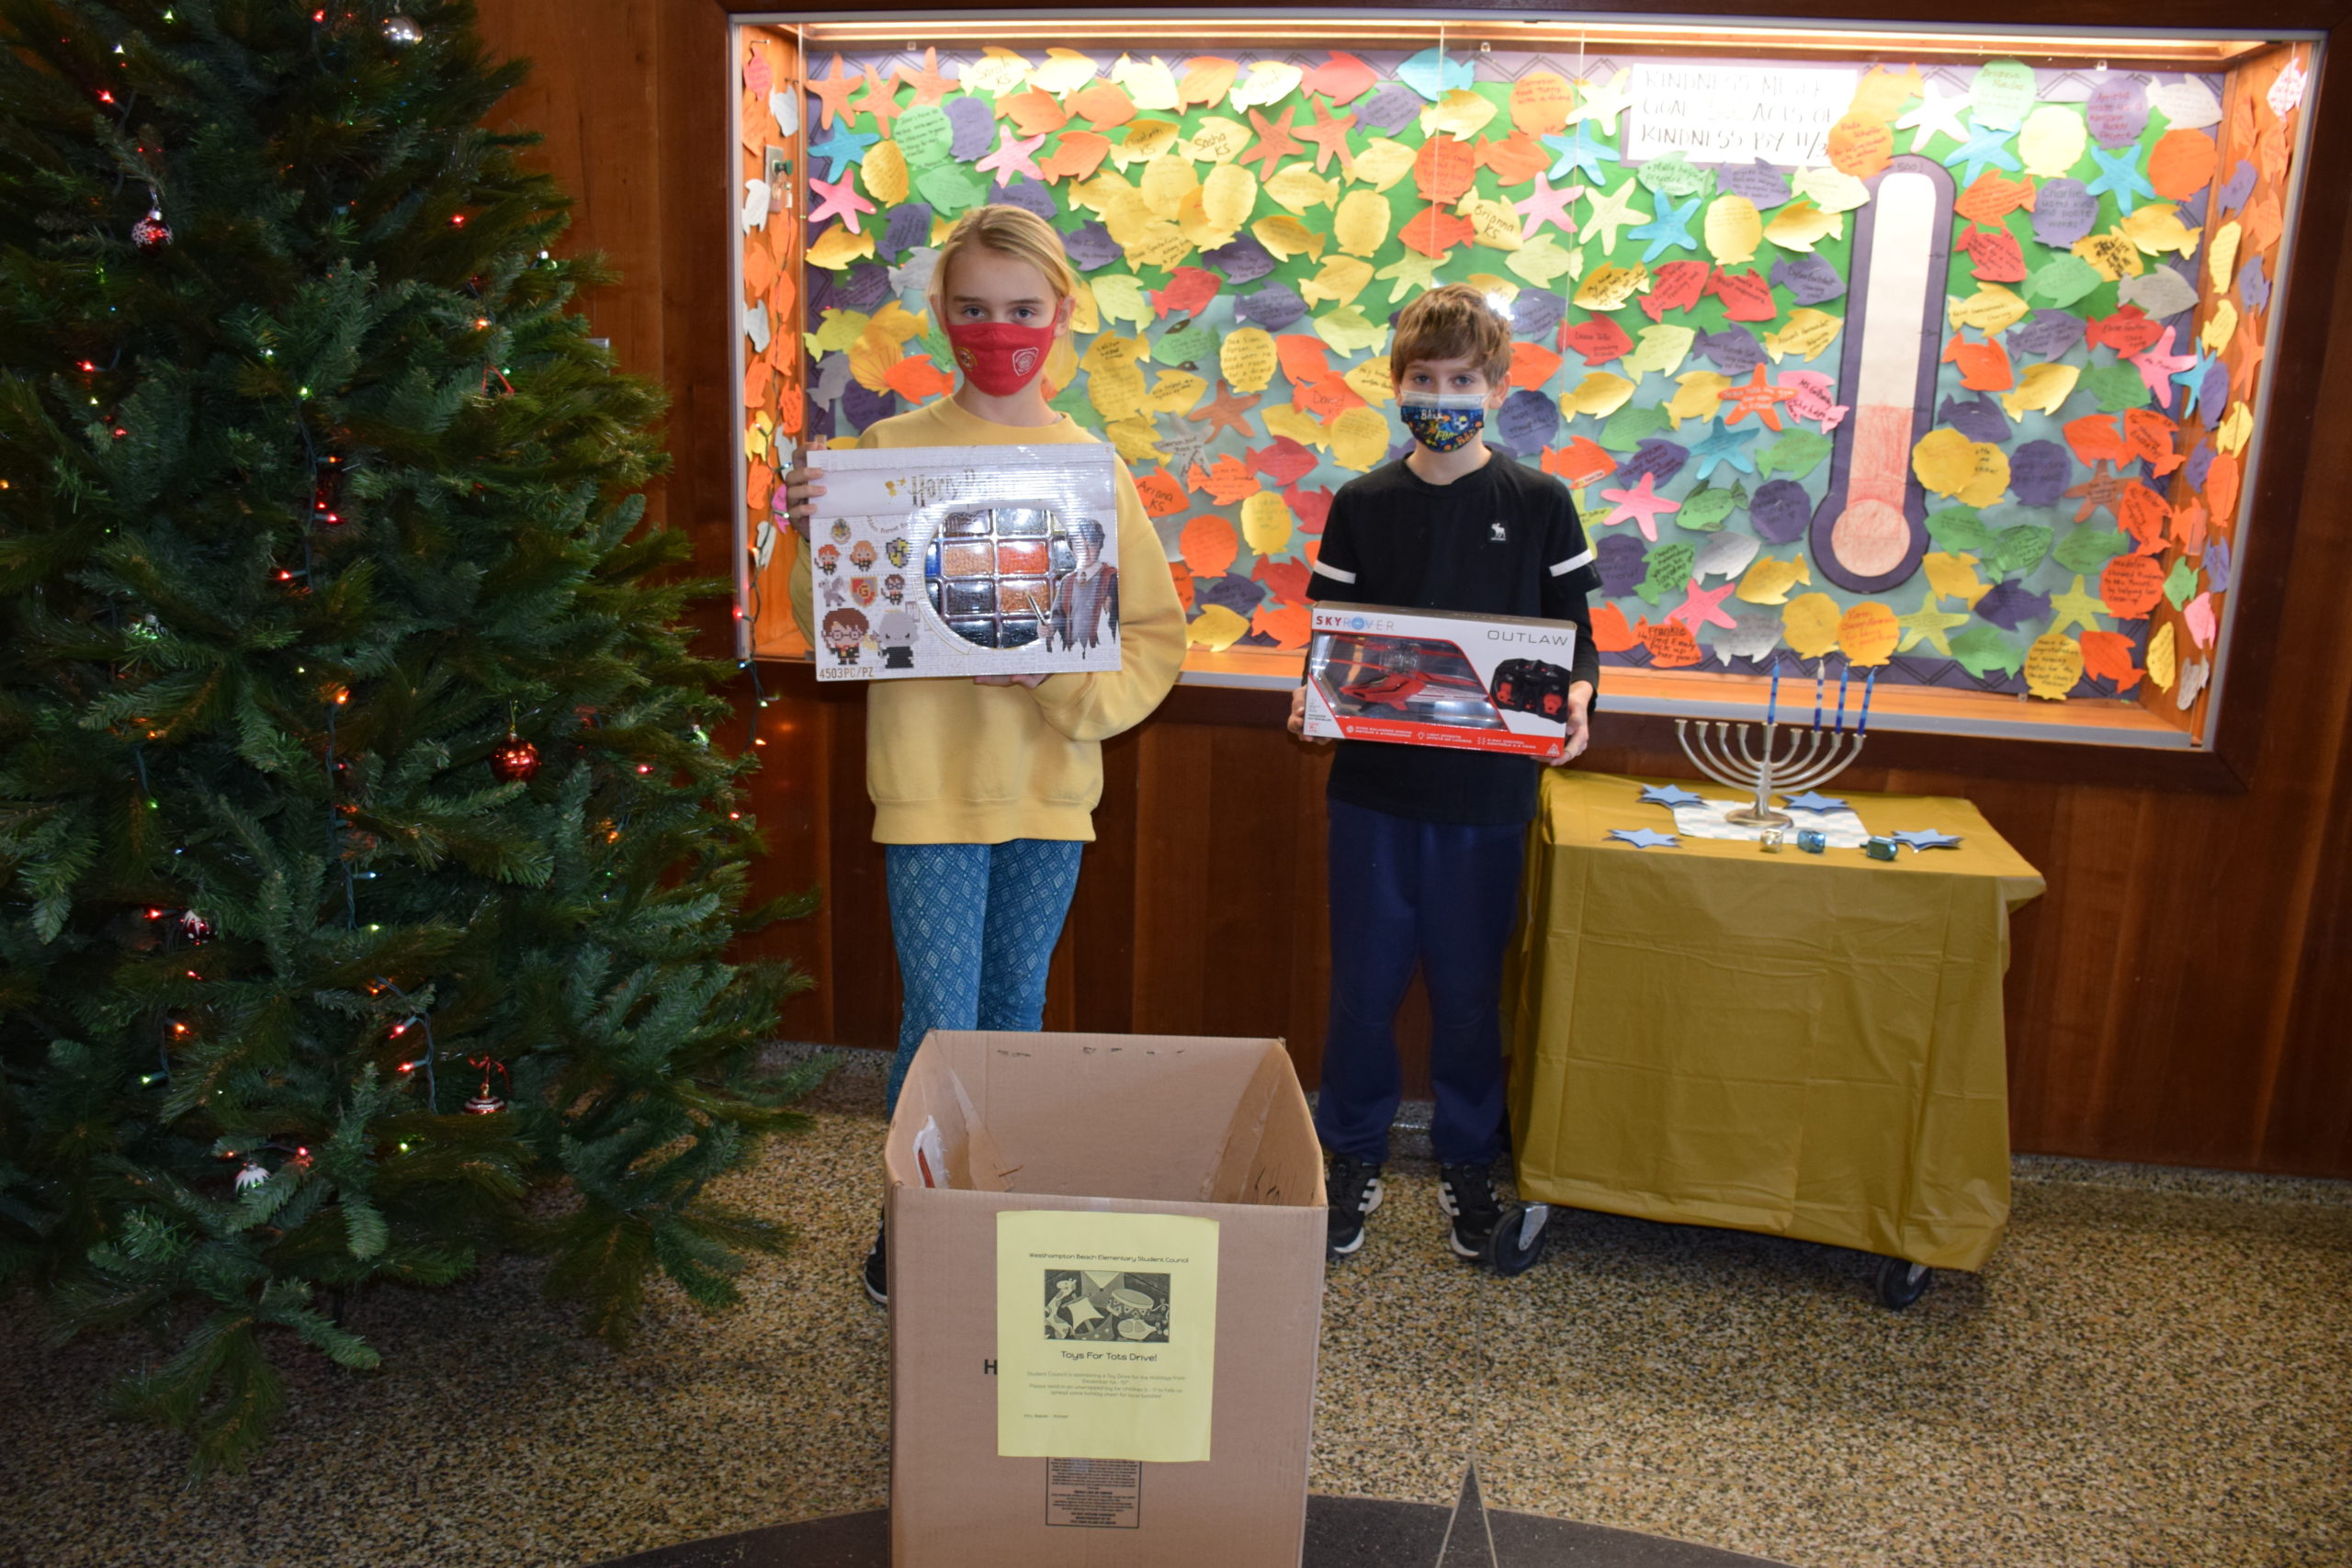 Members of the Westhampton Beach Elementary School Student Council kicked off their annual holiday toy drive. The students created signs and
collection boxes with a goal to amass as many toys as possible during the month of December. All of the toys will be donated to the Toys for Tots program.